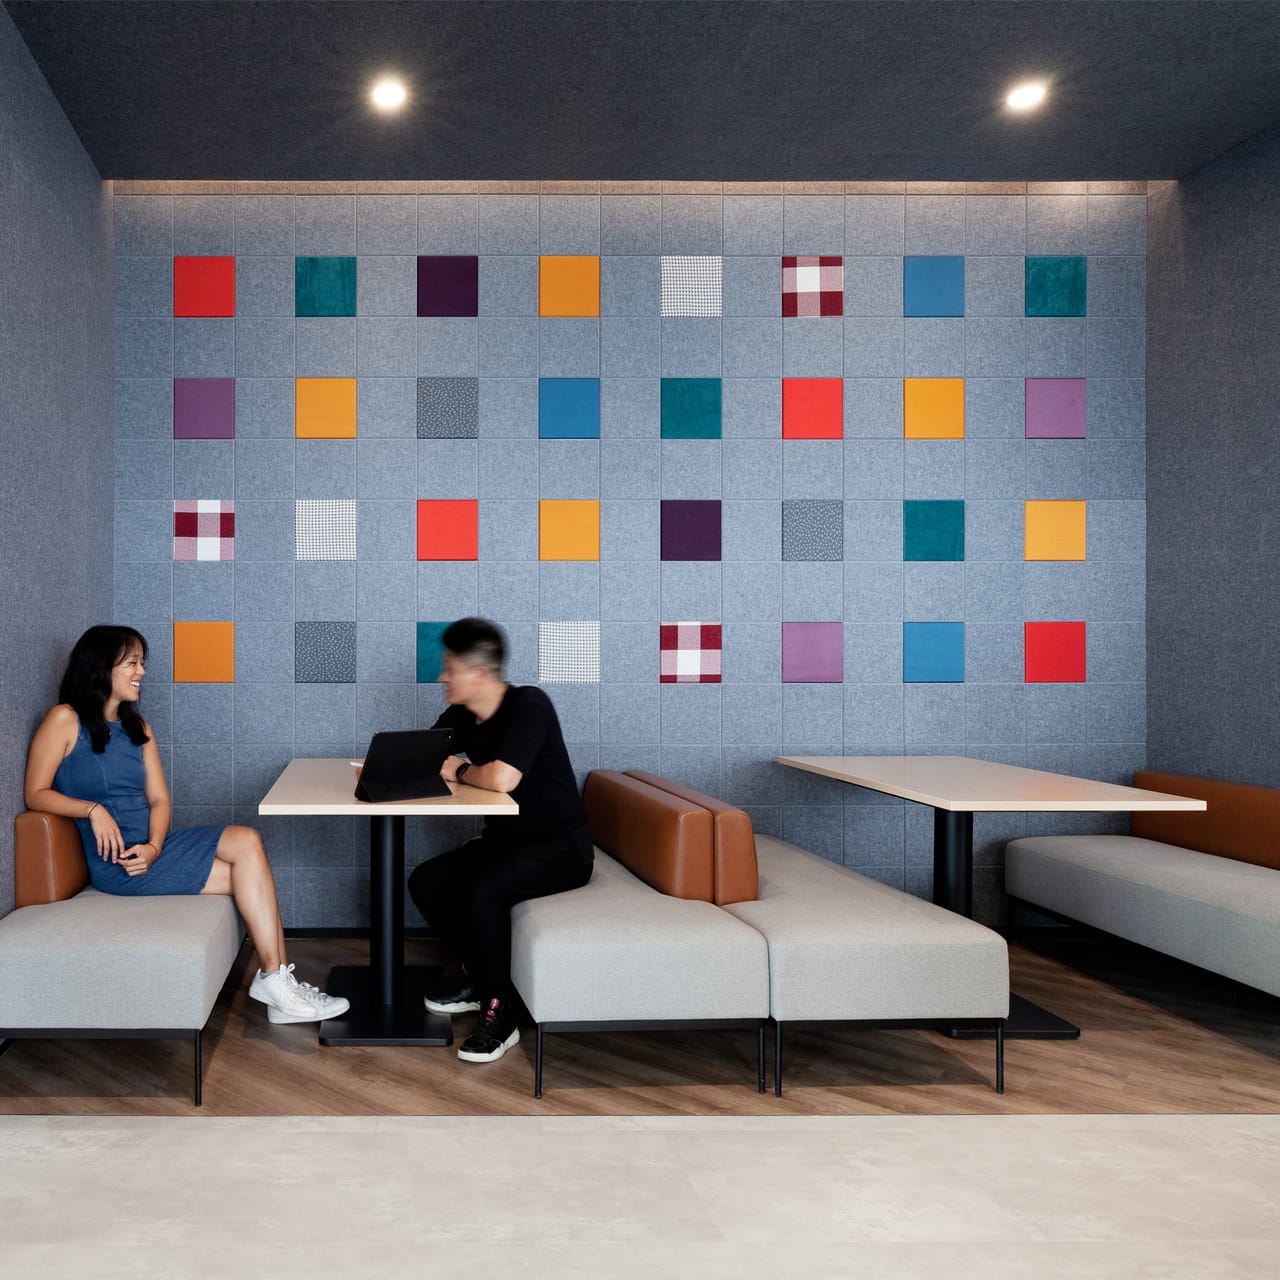 Acoustically sound meeting space at Zonkd's Shanghai space